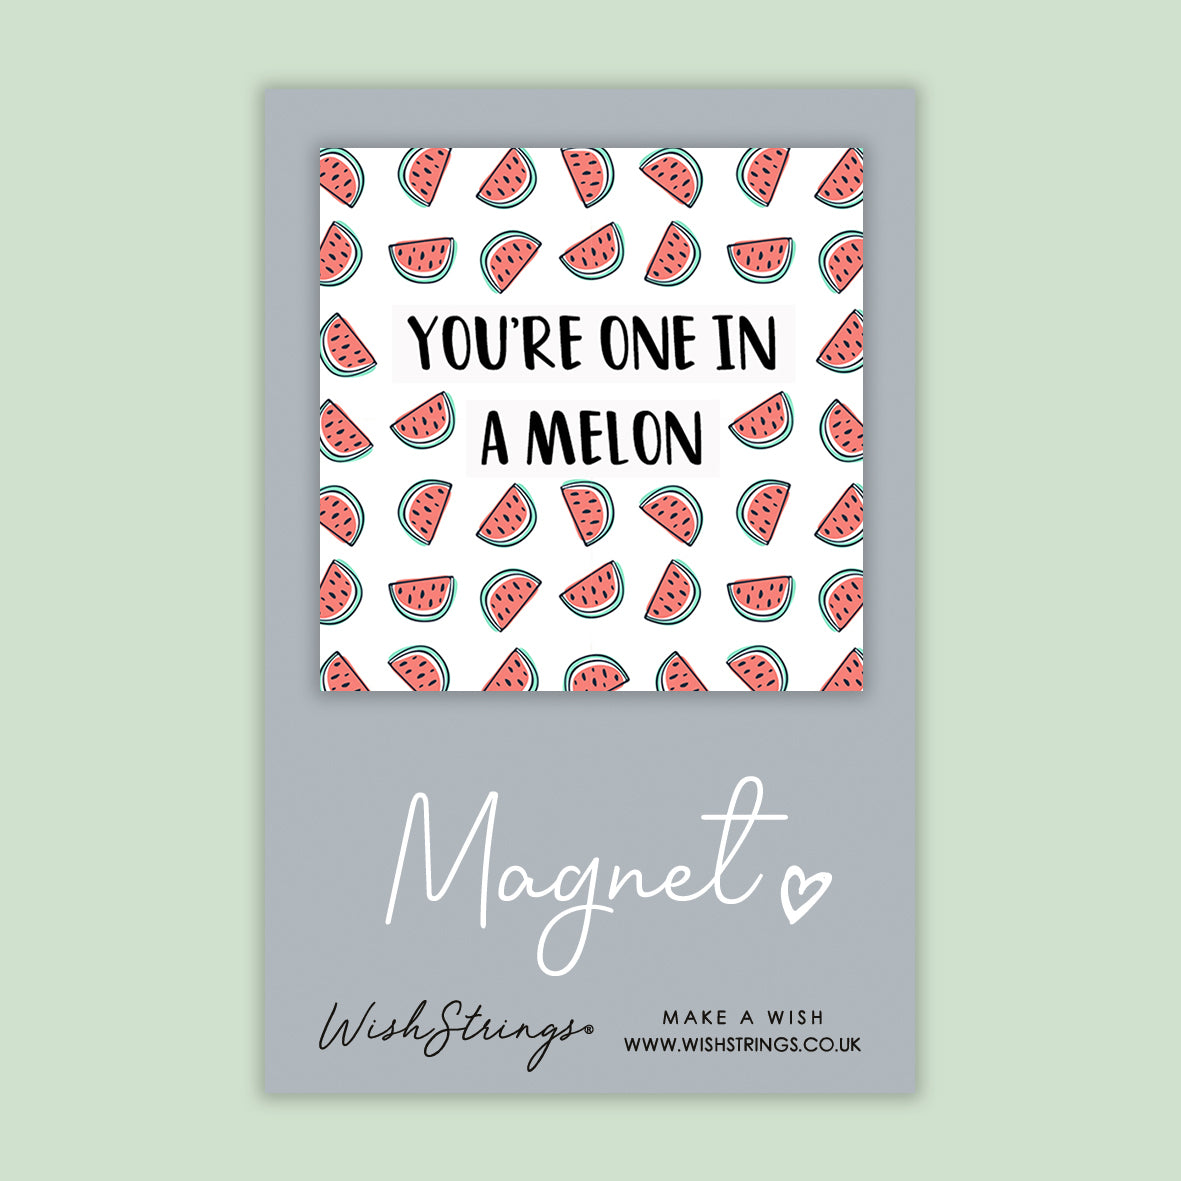 You're One in a Melon - Magnet